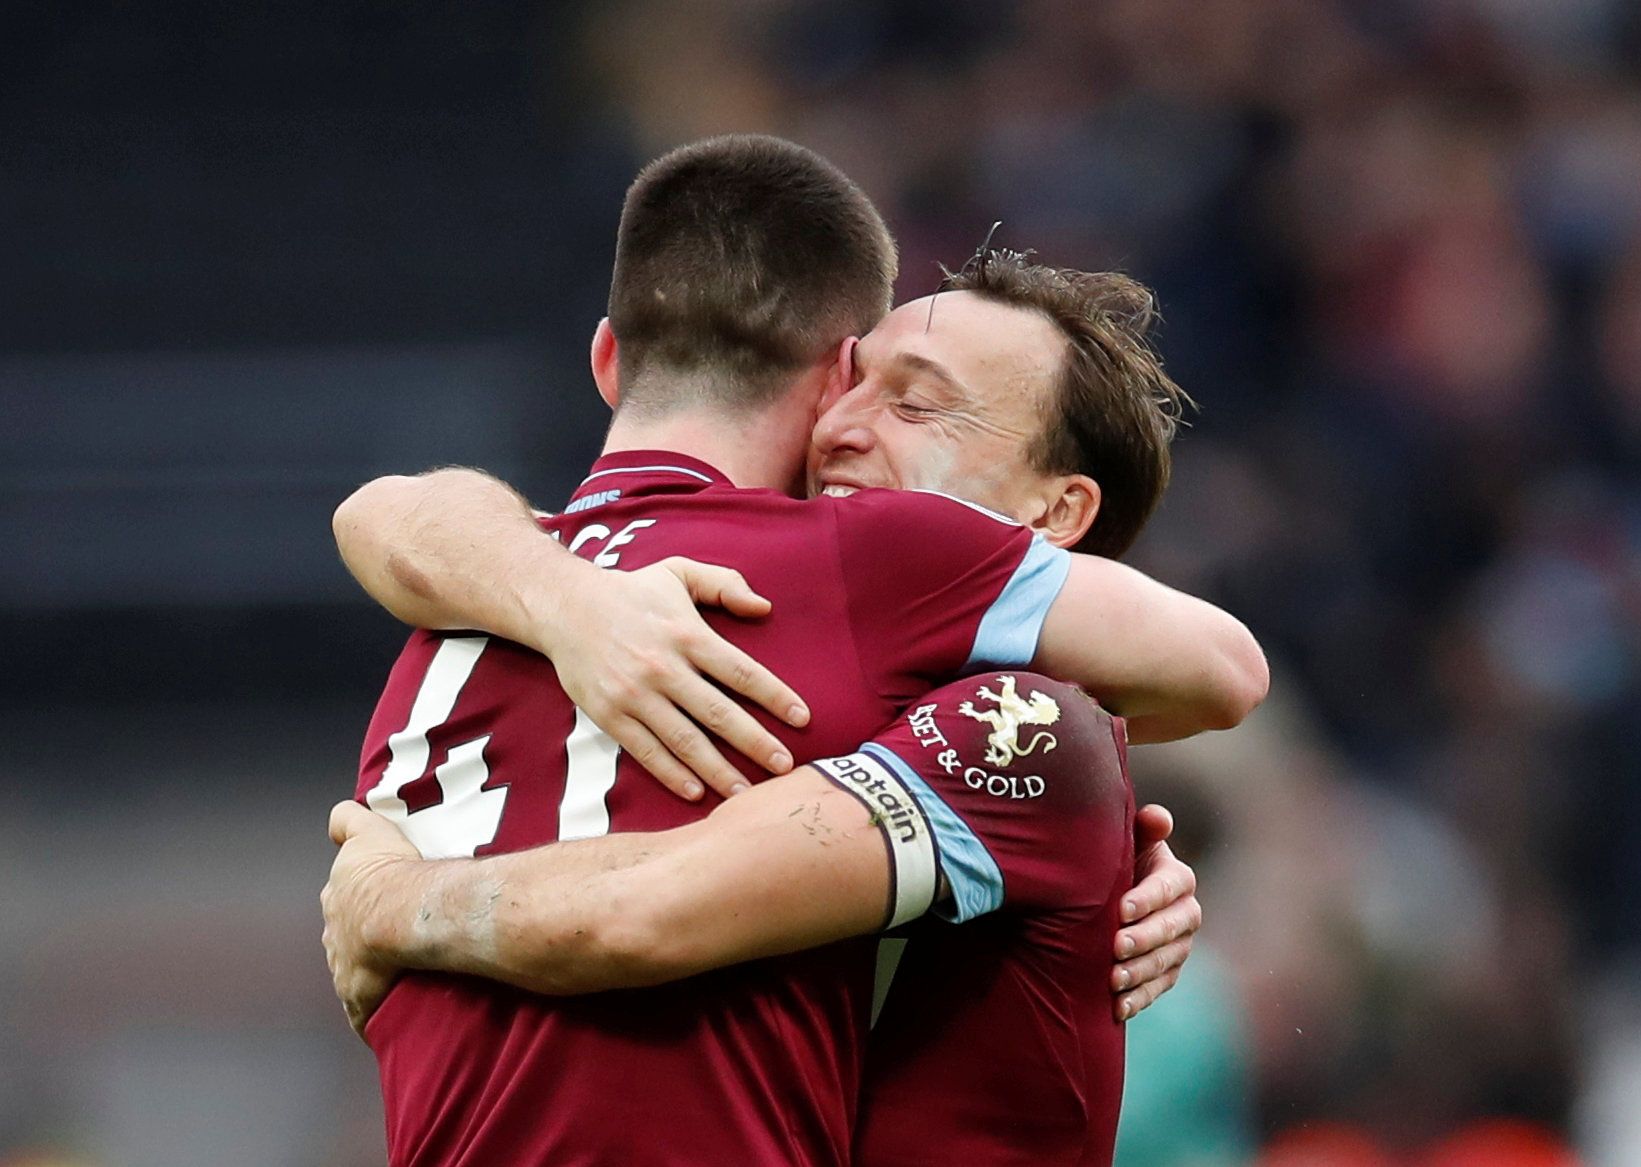 Soccer Football - Premier League - West Ham United v Arsenal - London Stadium, London, Britain - January 12, 2019  West Ham's Declan Rice celebrates after the match with Mark Noble                     REUTERS/David Klein  EDITORIAL USE ONLY. No use with unauthorized audio, video, data, fixture lists, club/league logos or 